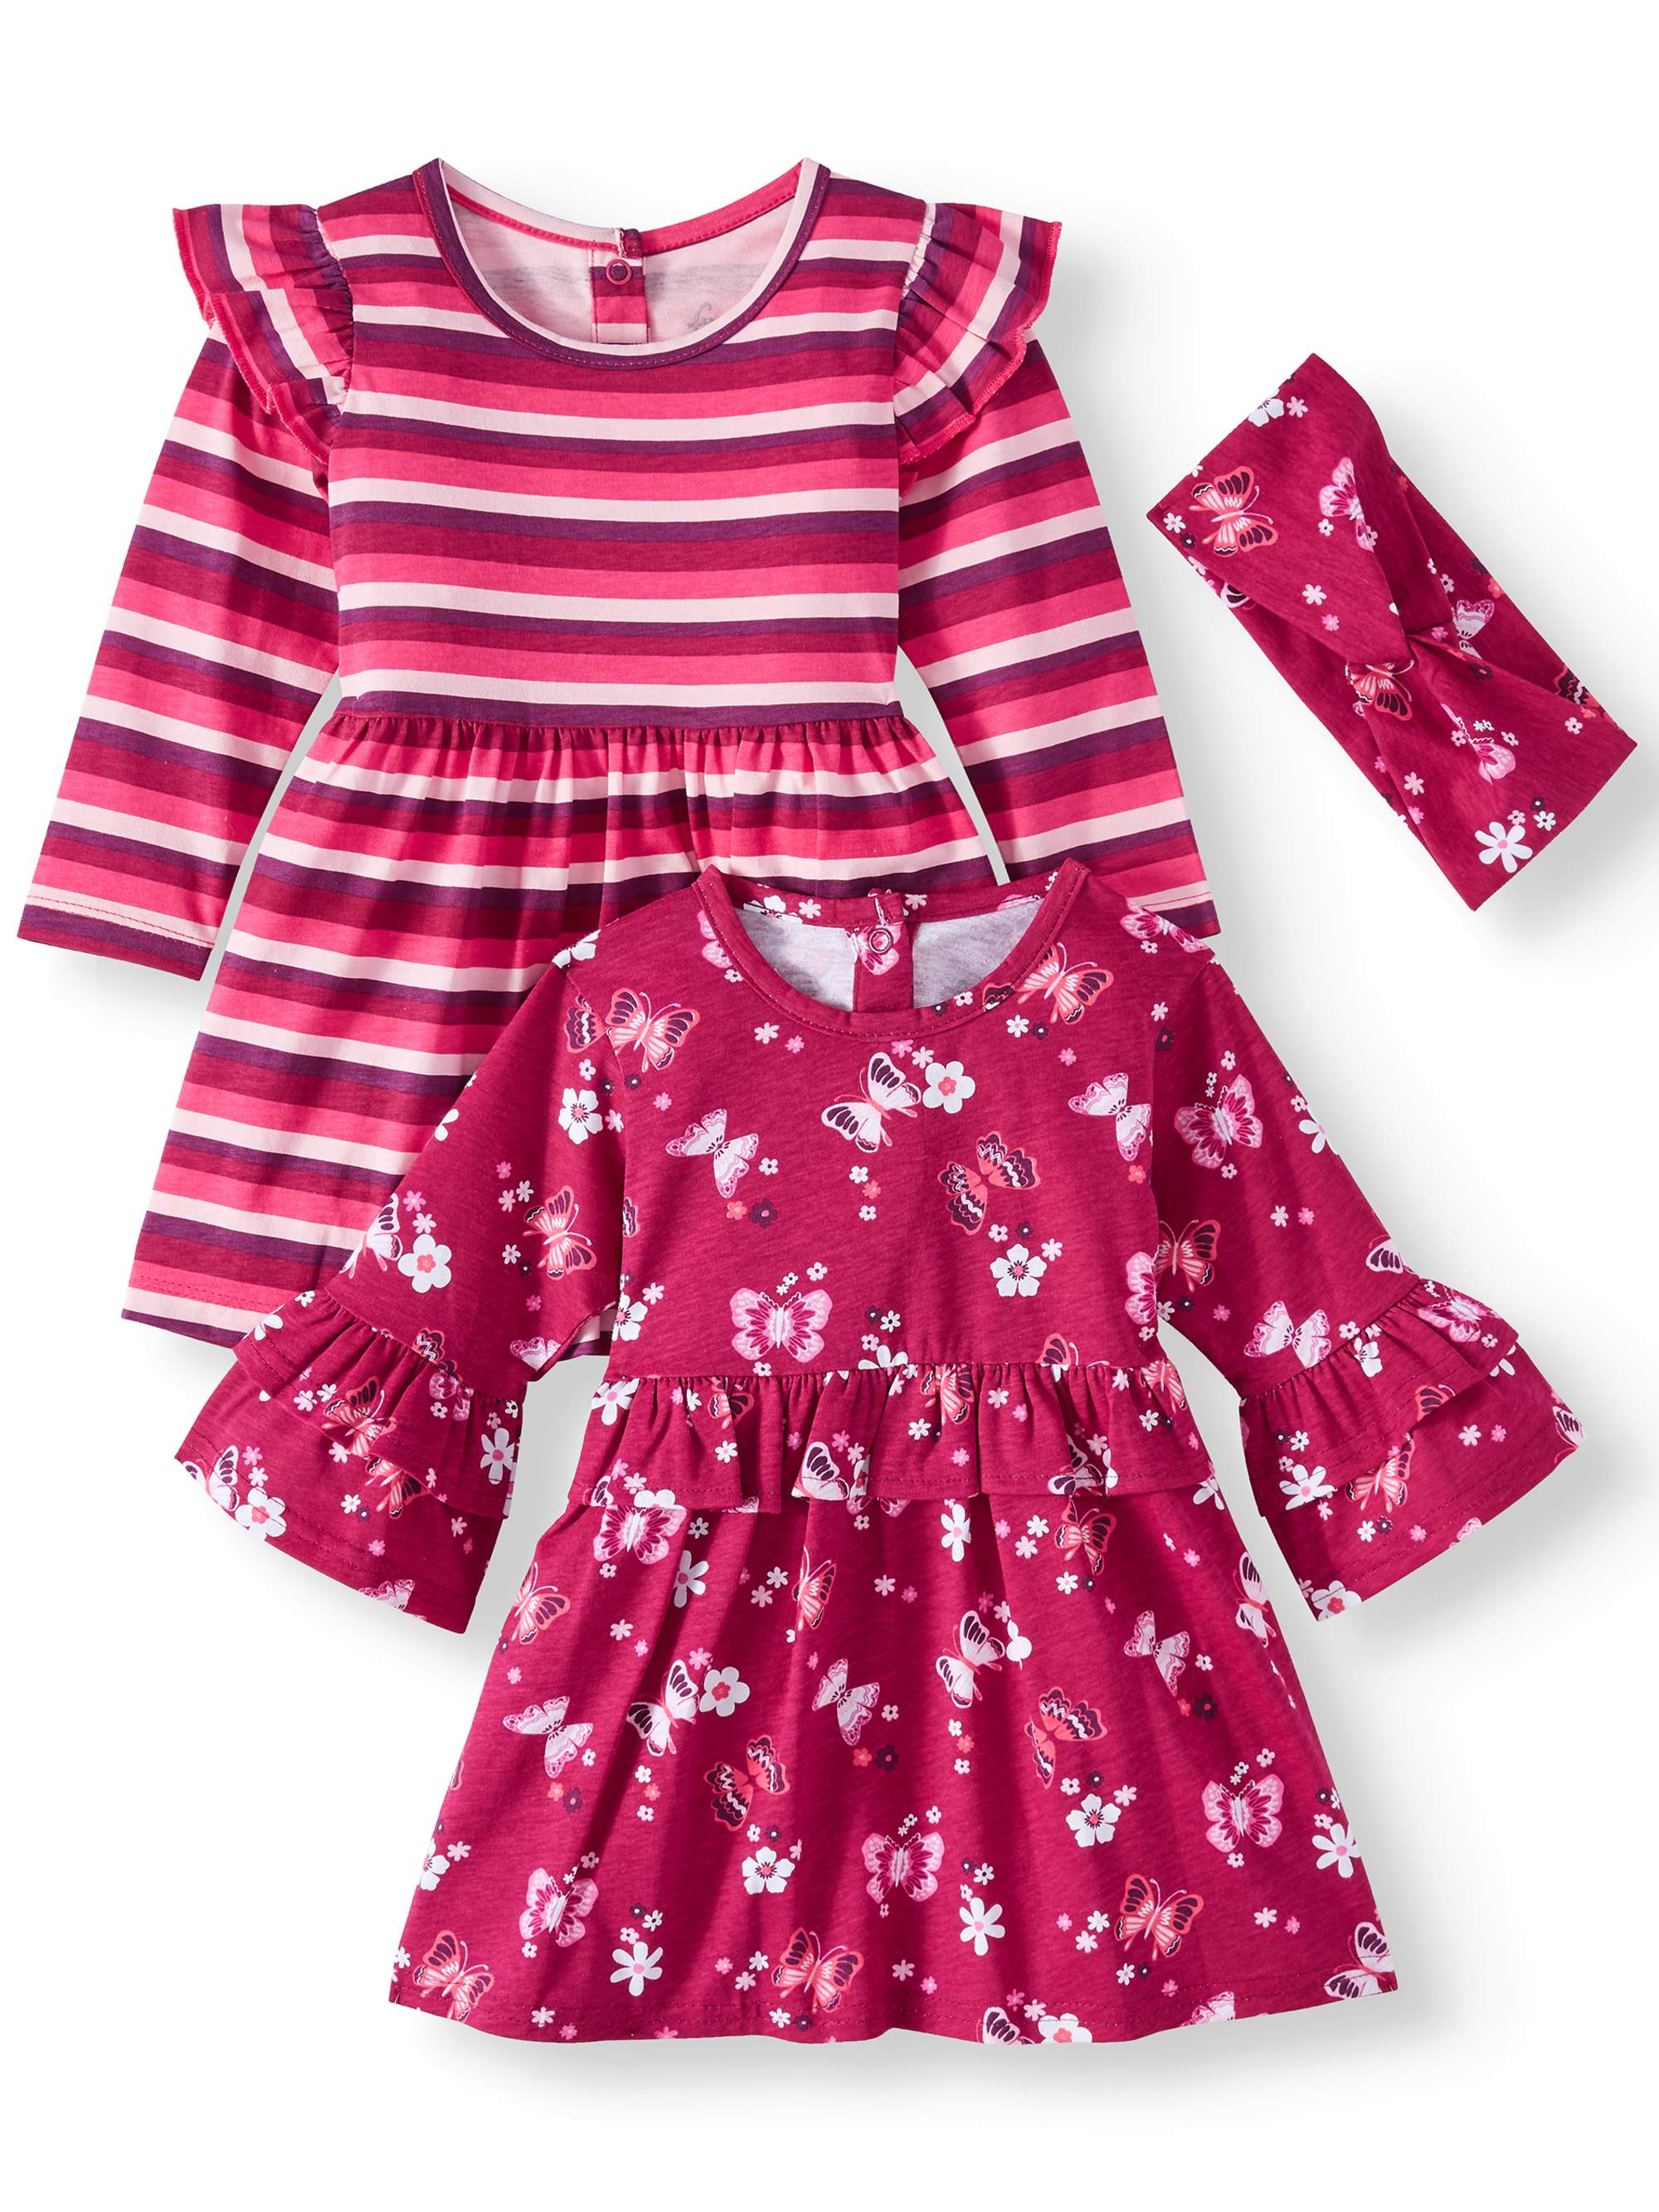 Freestyle Revolution 2-Pack Ruffled Detail Yummy Play Dress With Headband (Little Girls & Big Girls) - image 1 of 3